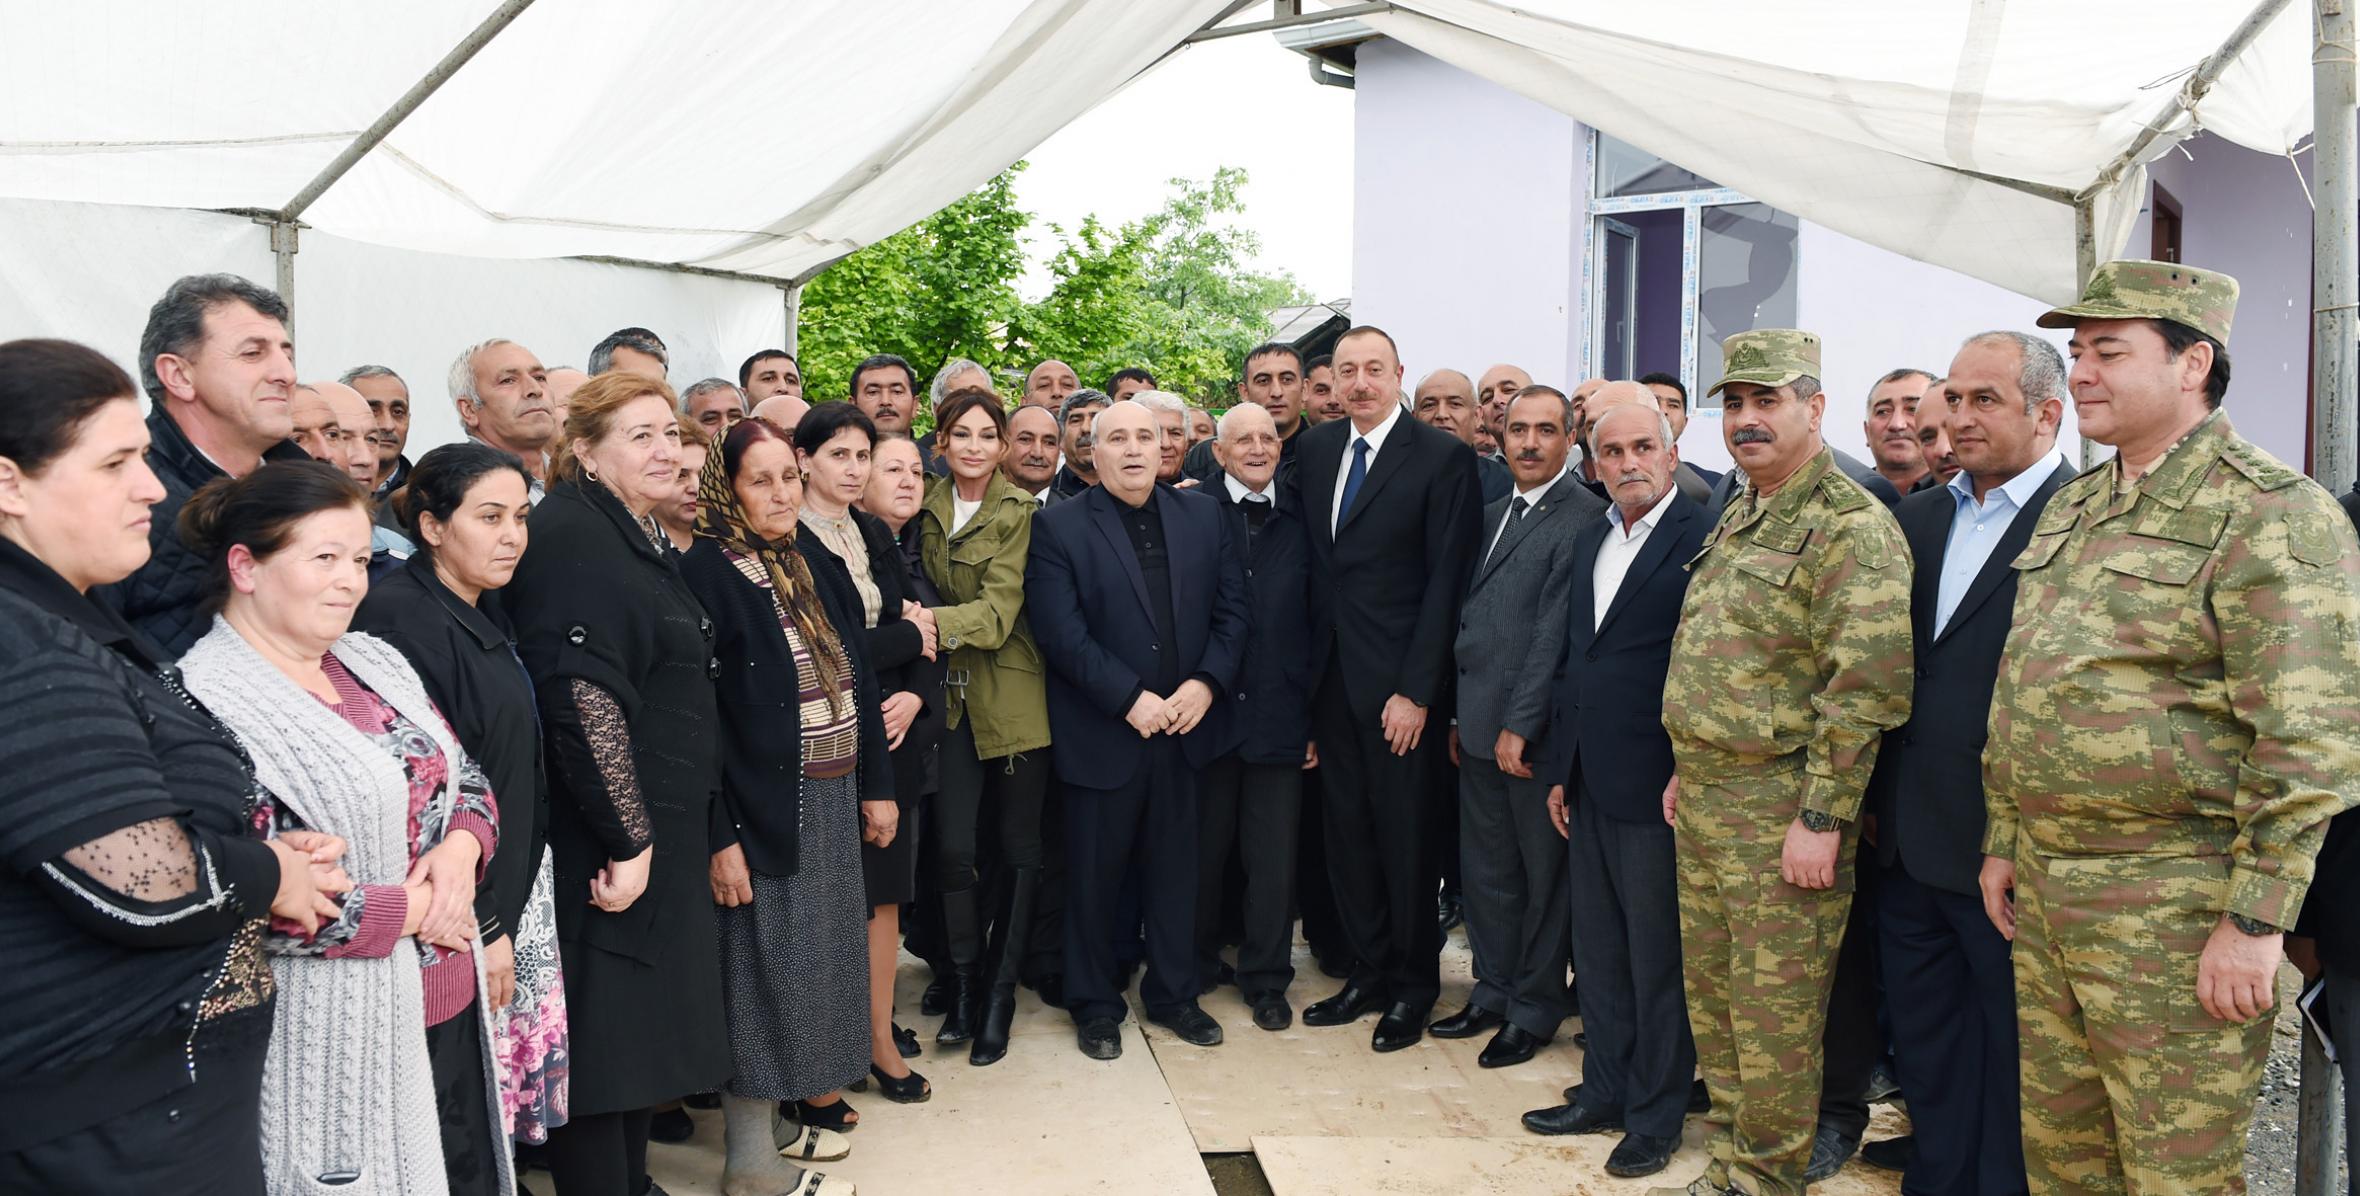 Ilham Aliyev met with residents of Makhrizli village, Agdam, on the line of contact